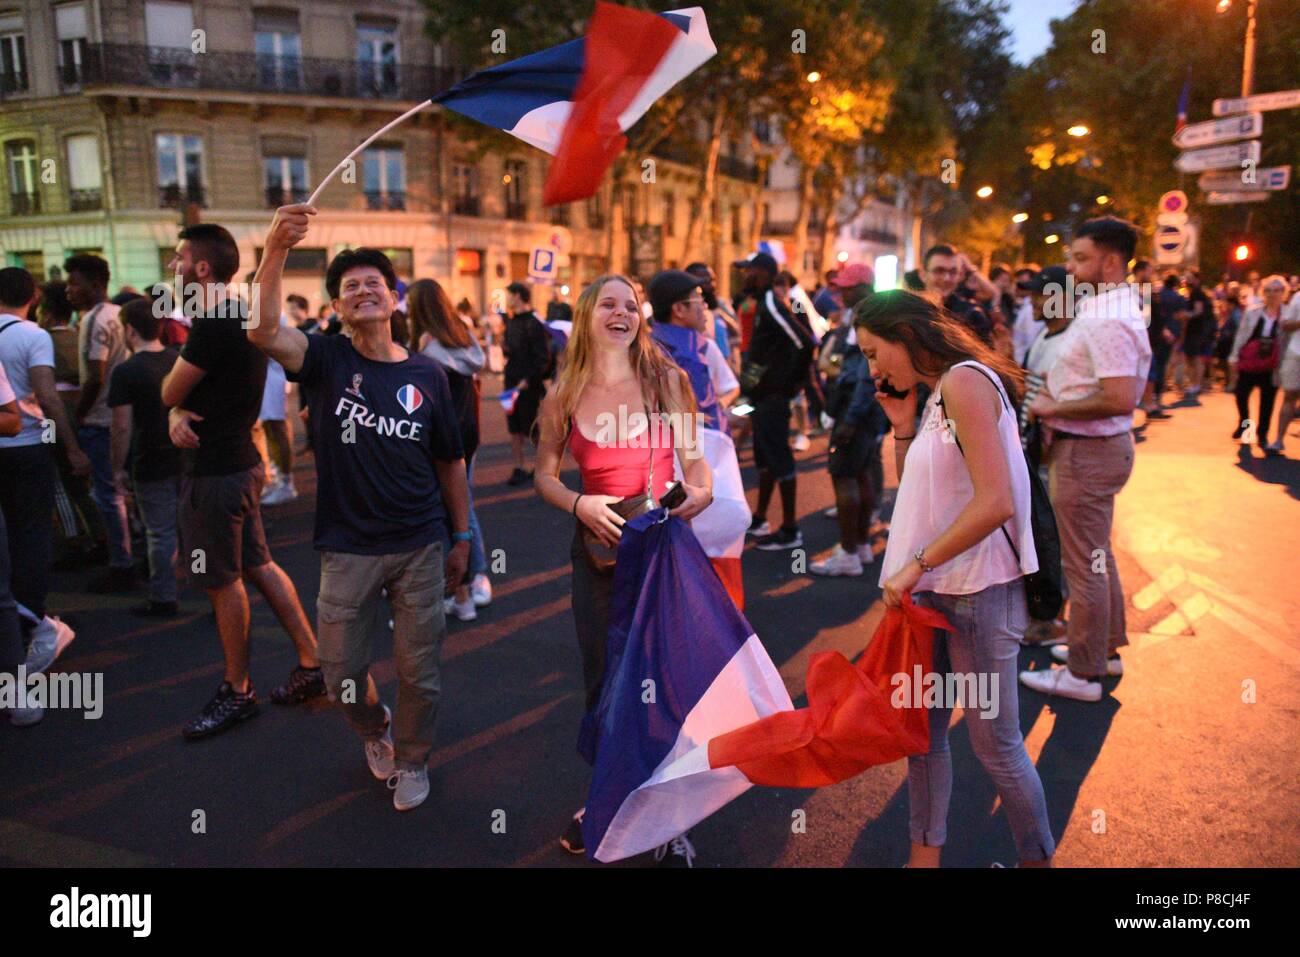 July 10, 2018 - Paris, France: Supporters of the French football team  celebrate after France beat Belgium 1-0 to reach the World Cup final. Des  supporters de l'equipe de France de football